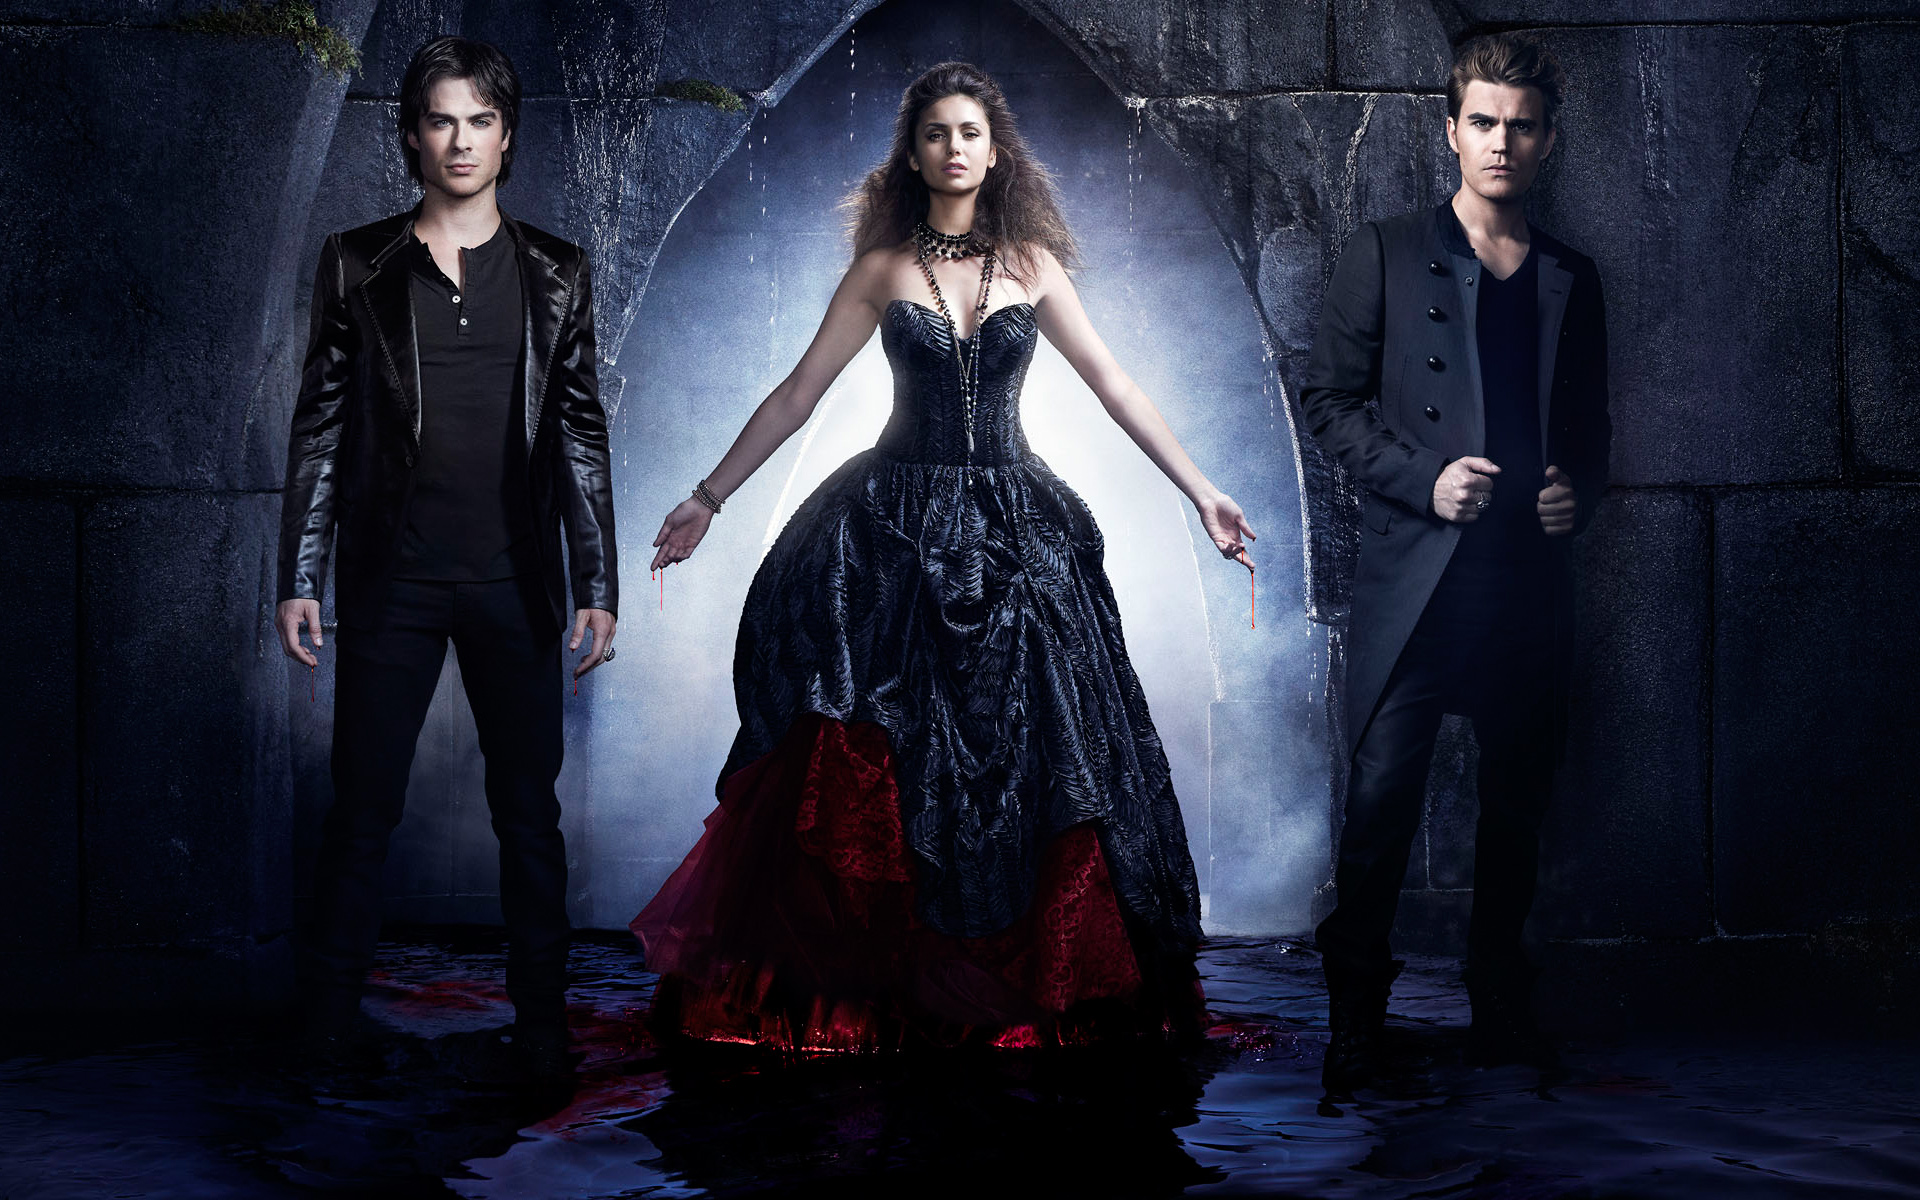 Image in Vampire Diaries collection by Rajae LD